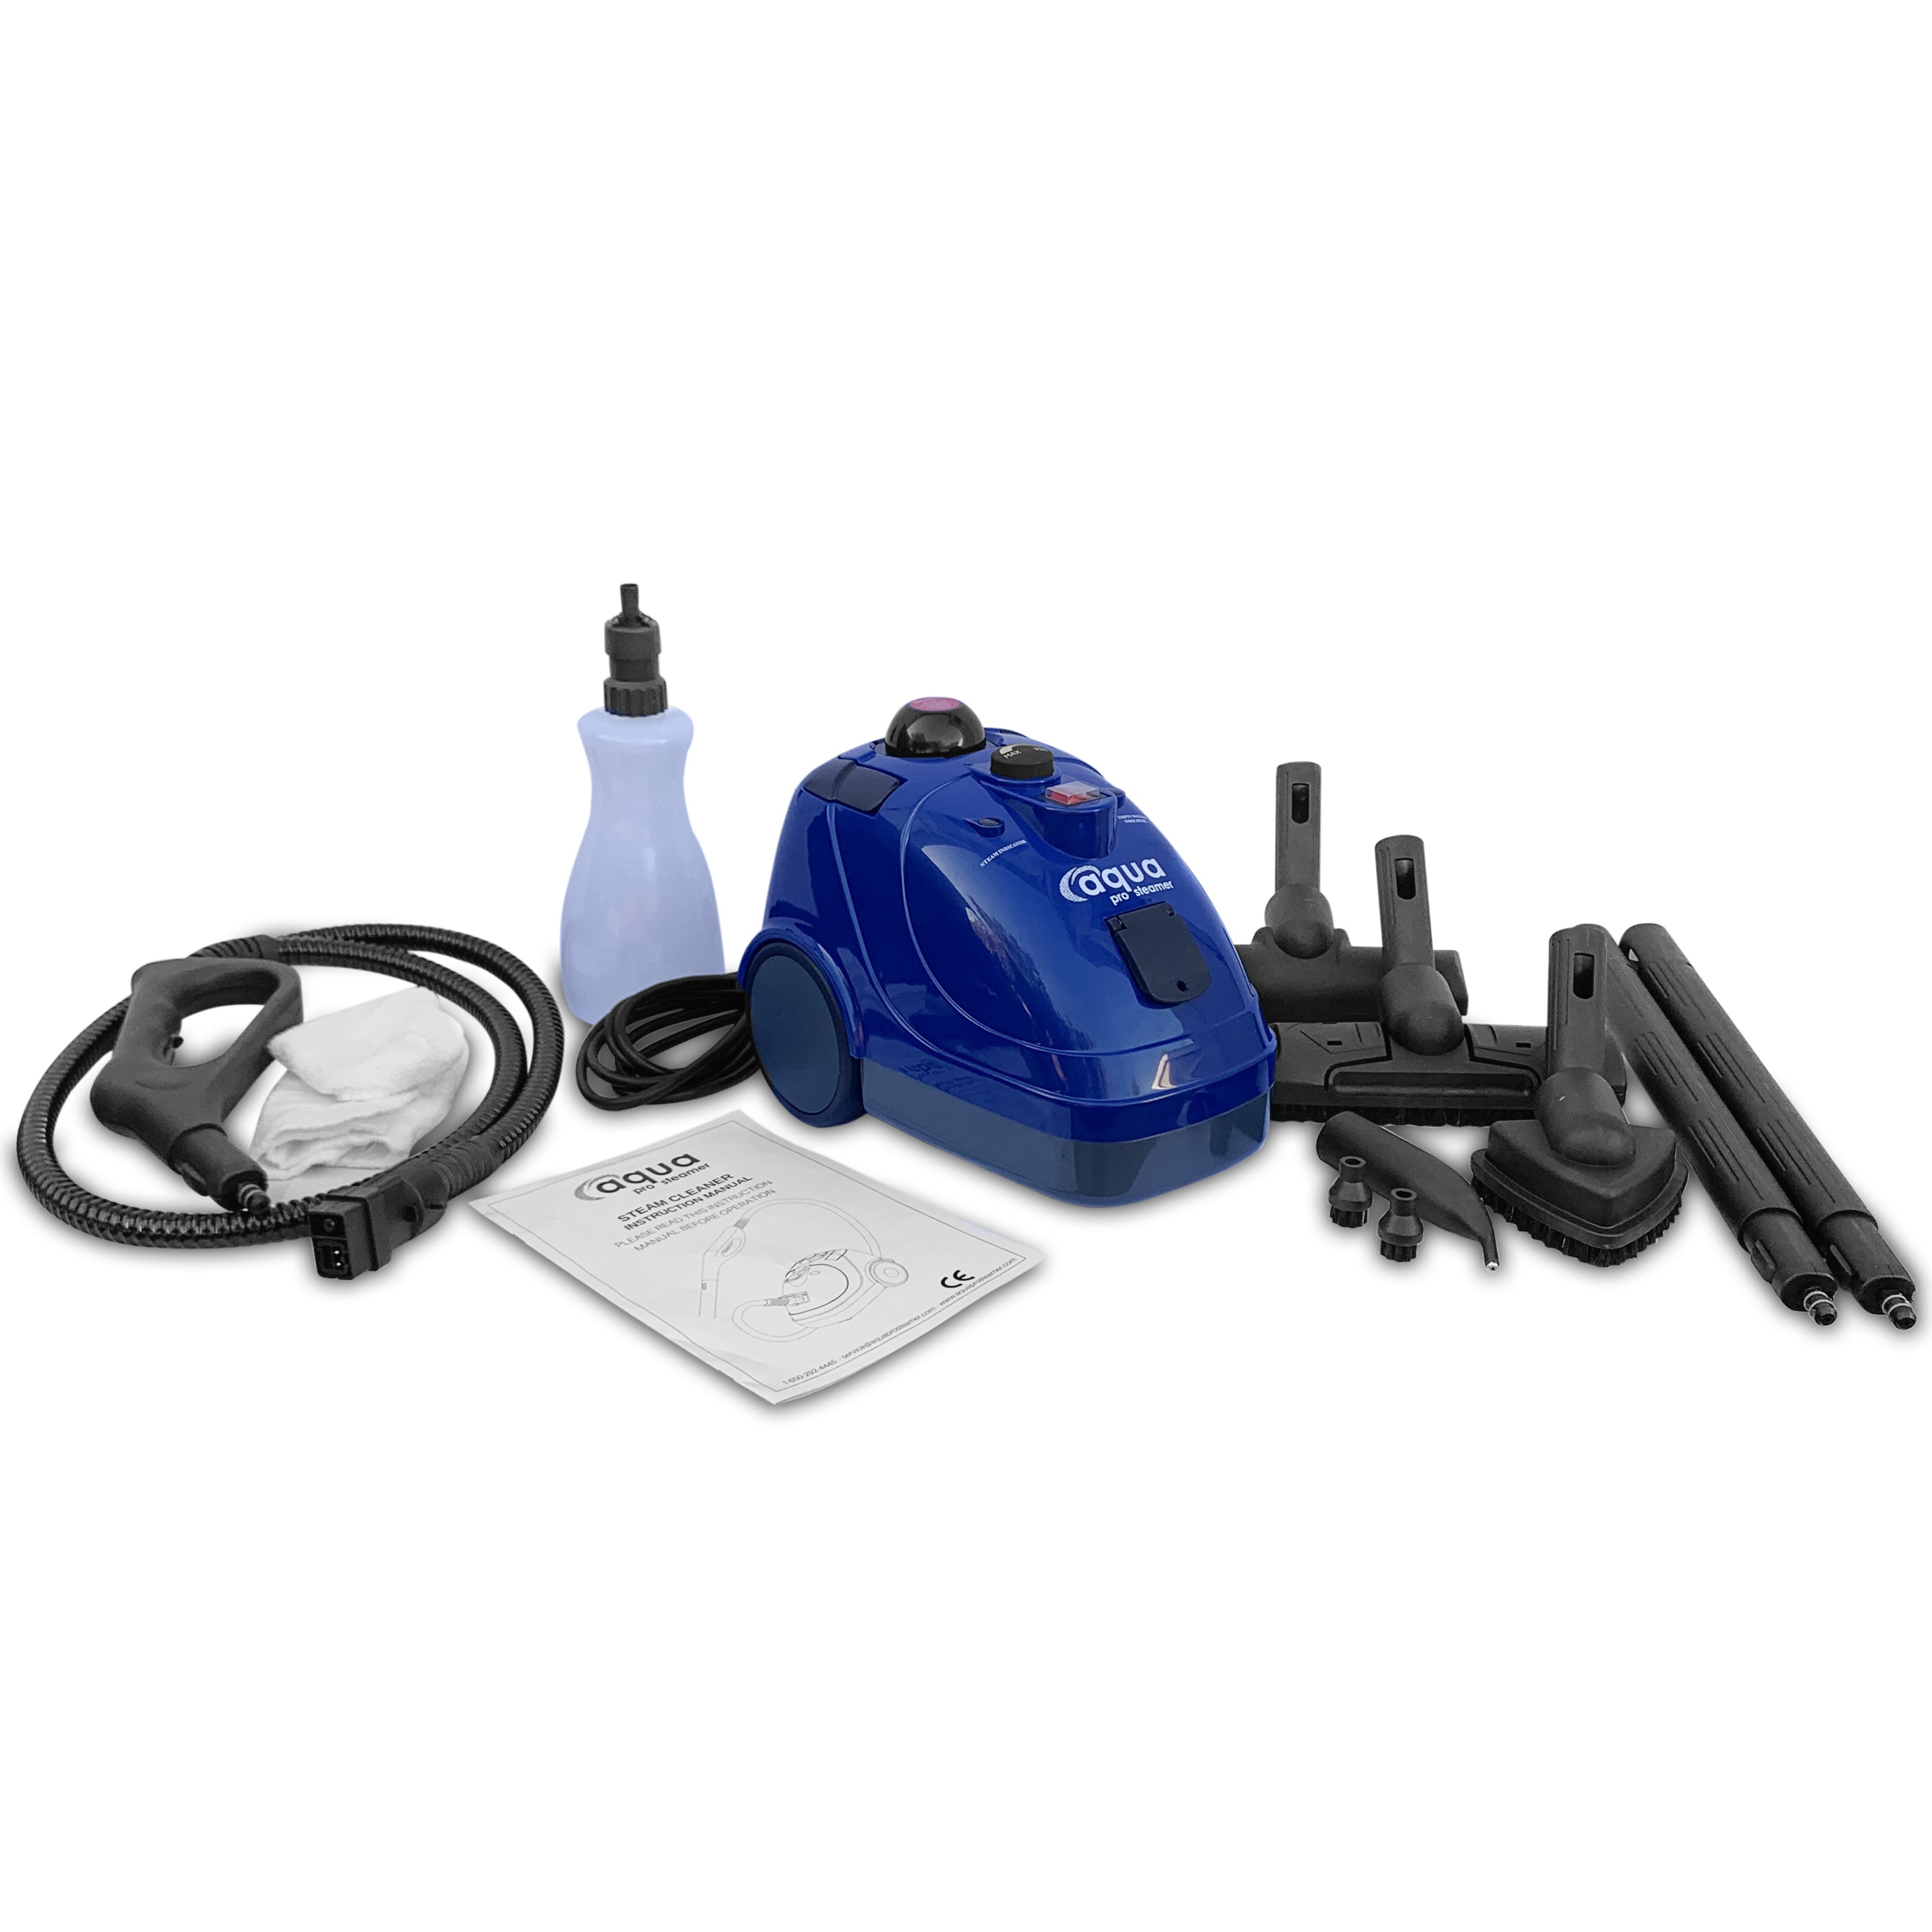 Aqua Pro Steam Cleaner with Accessories